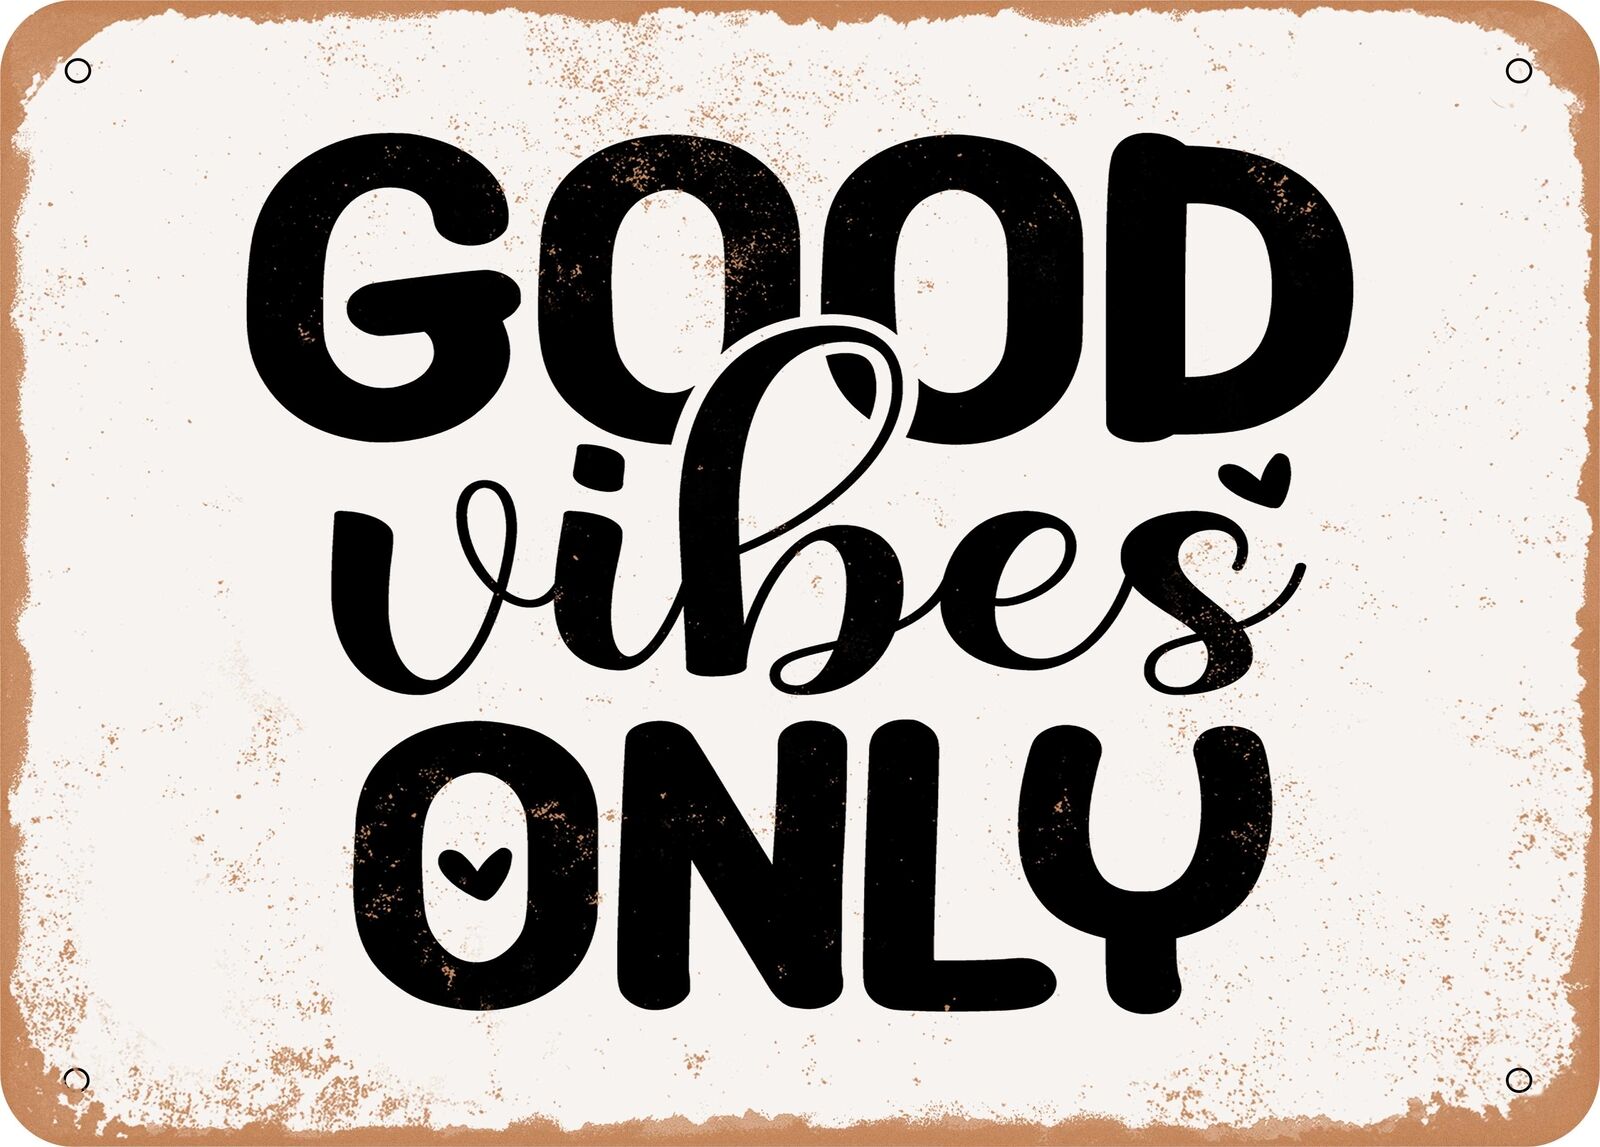 Metal Sign - Good Vibes Only - Vintage Rusty Look Sign